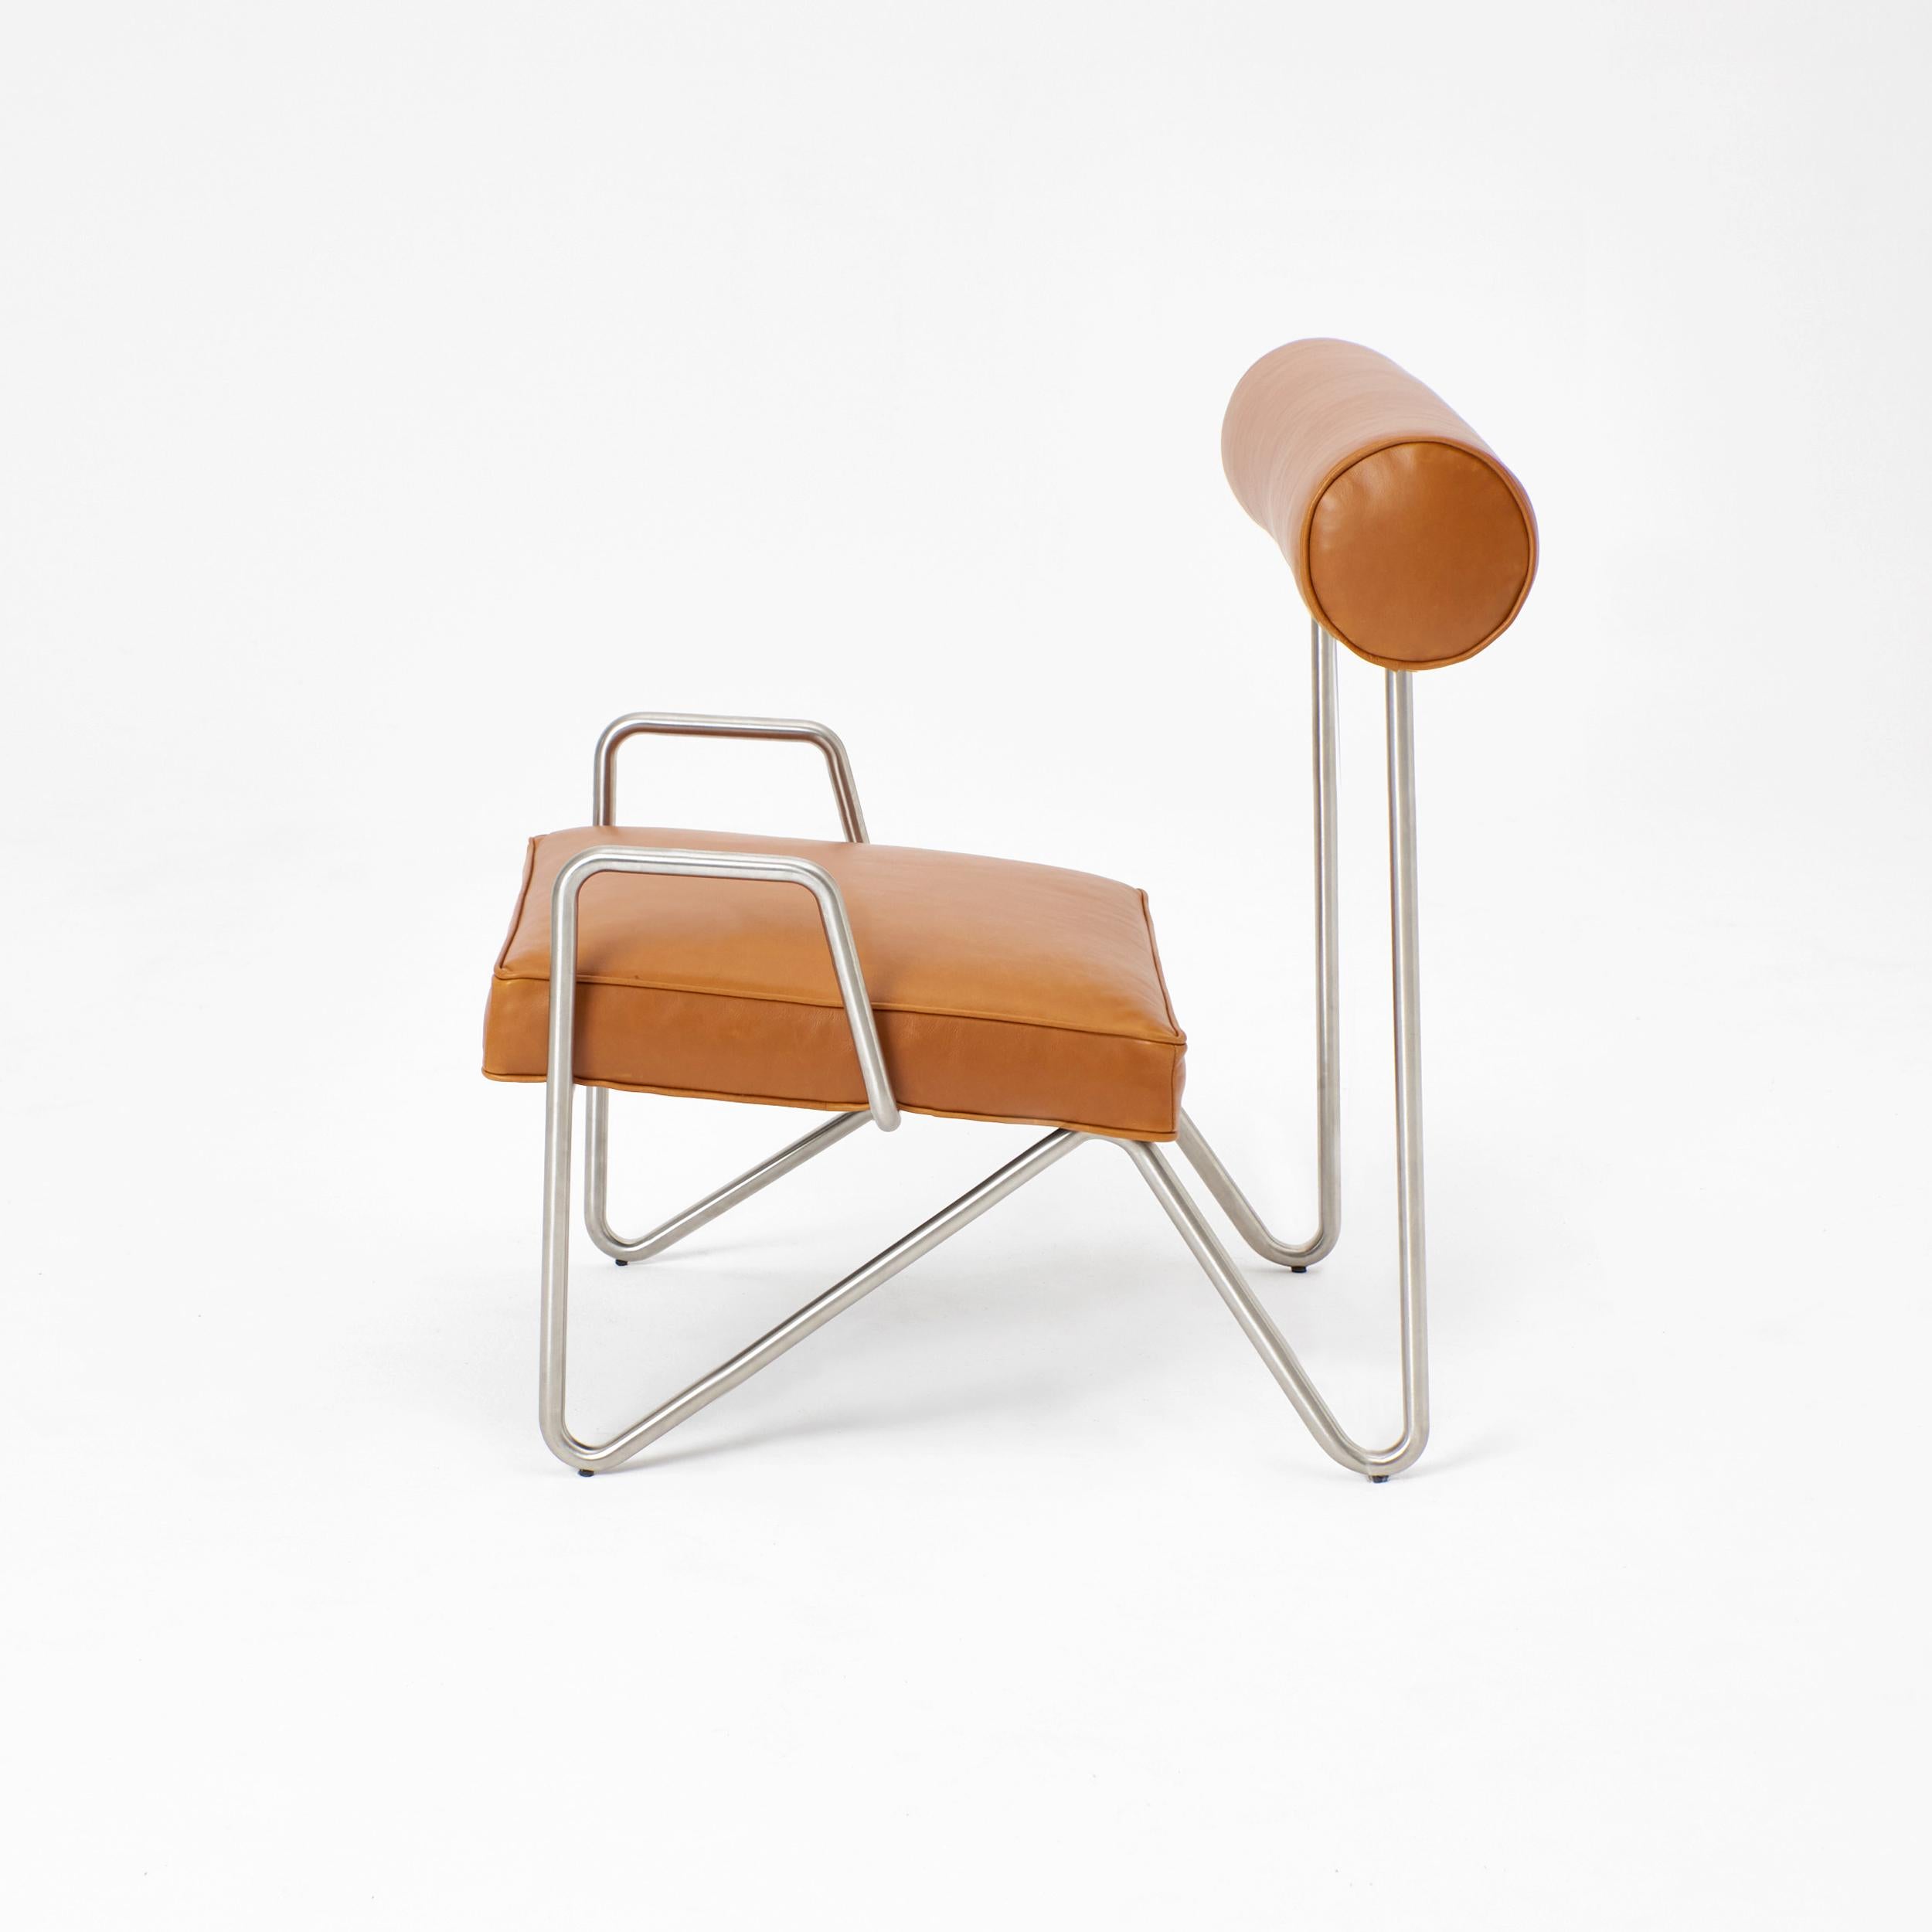 Metal Tan Larry's Lounge Chair by Project 213A